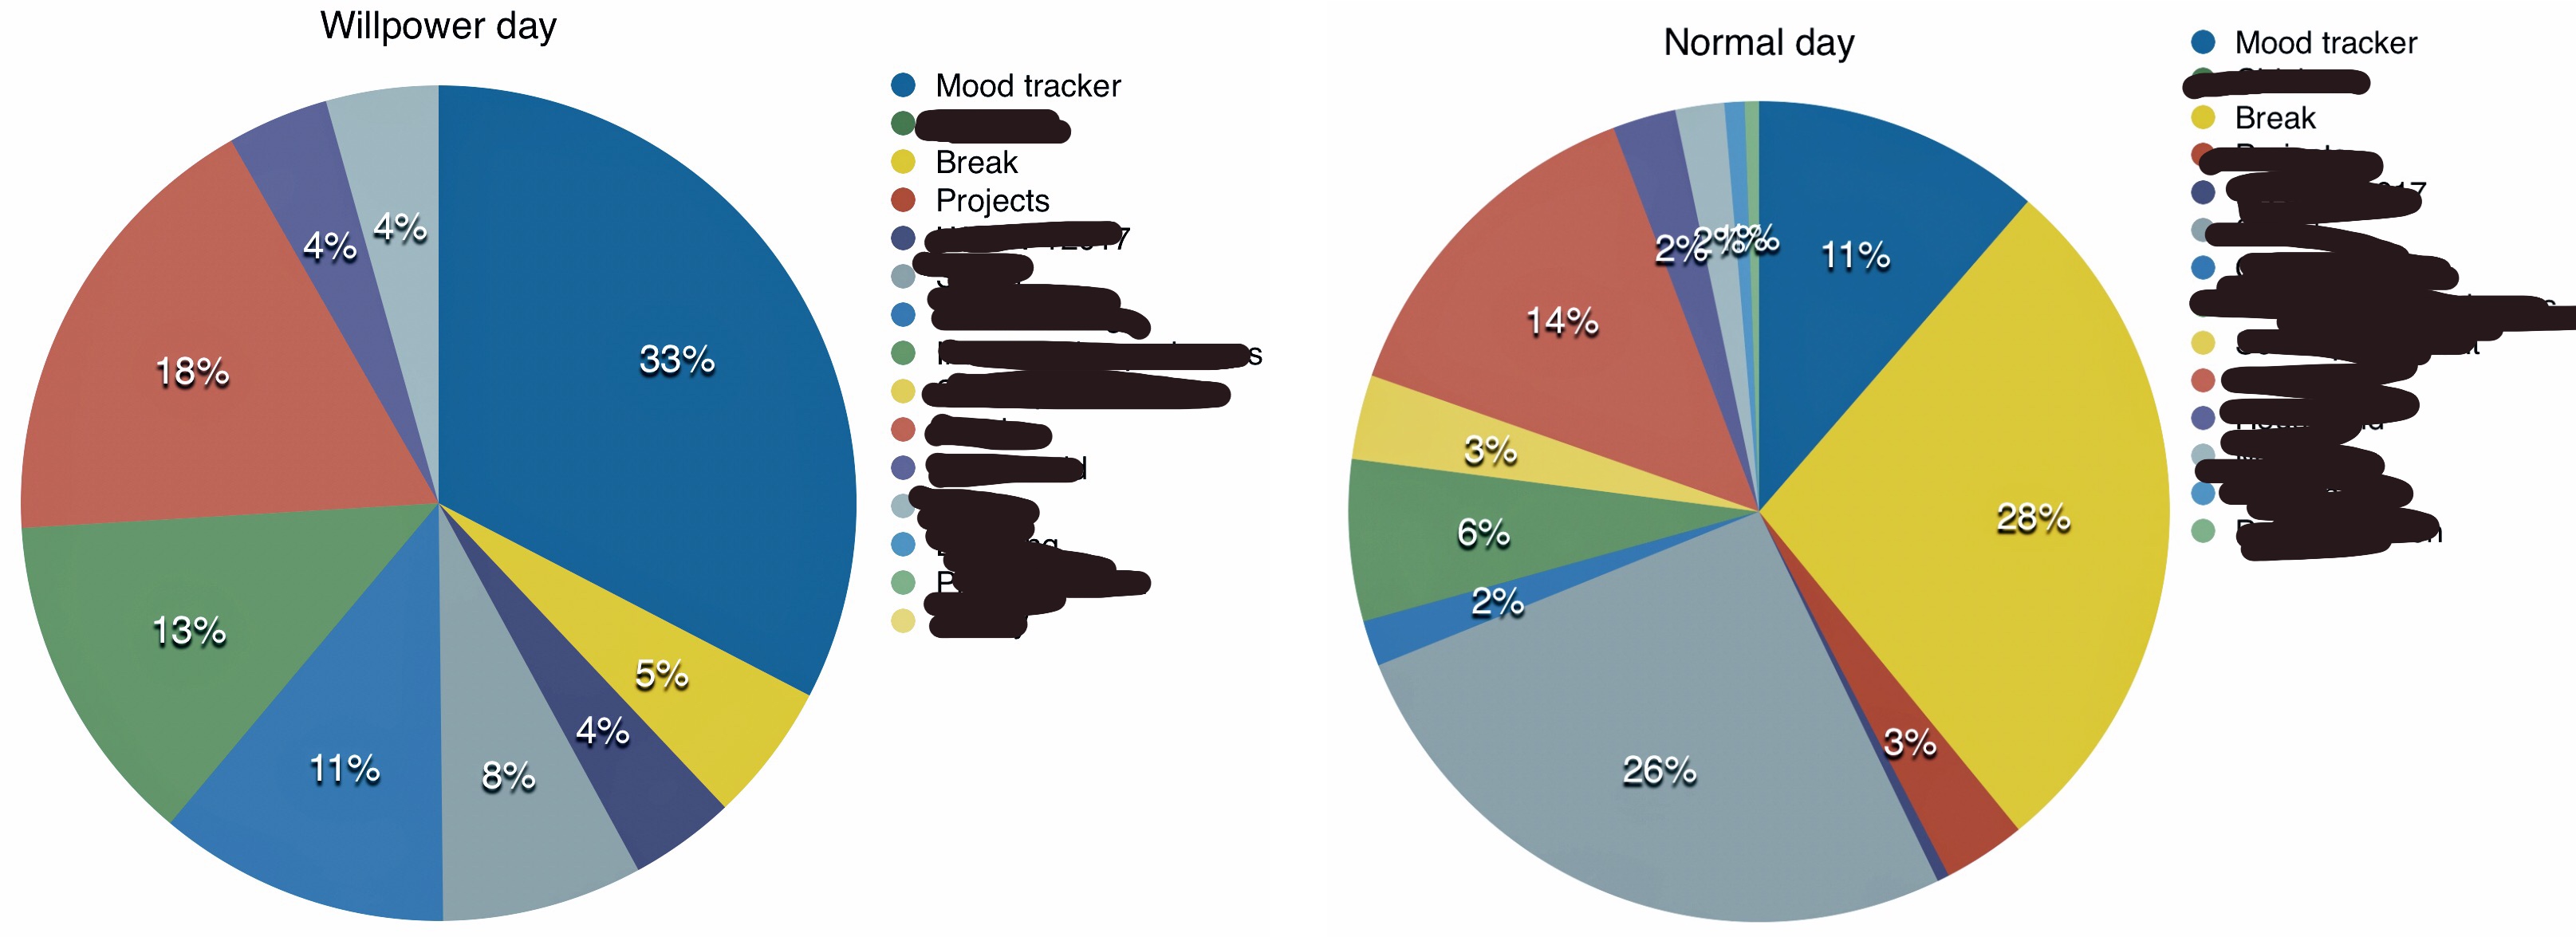 Pie chart showing the distribution of activities on an average day, compared to willpower day